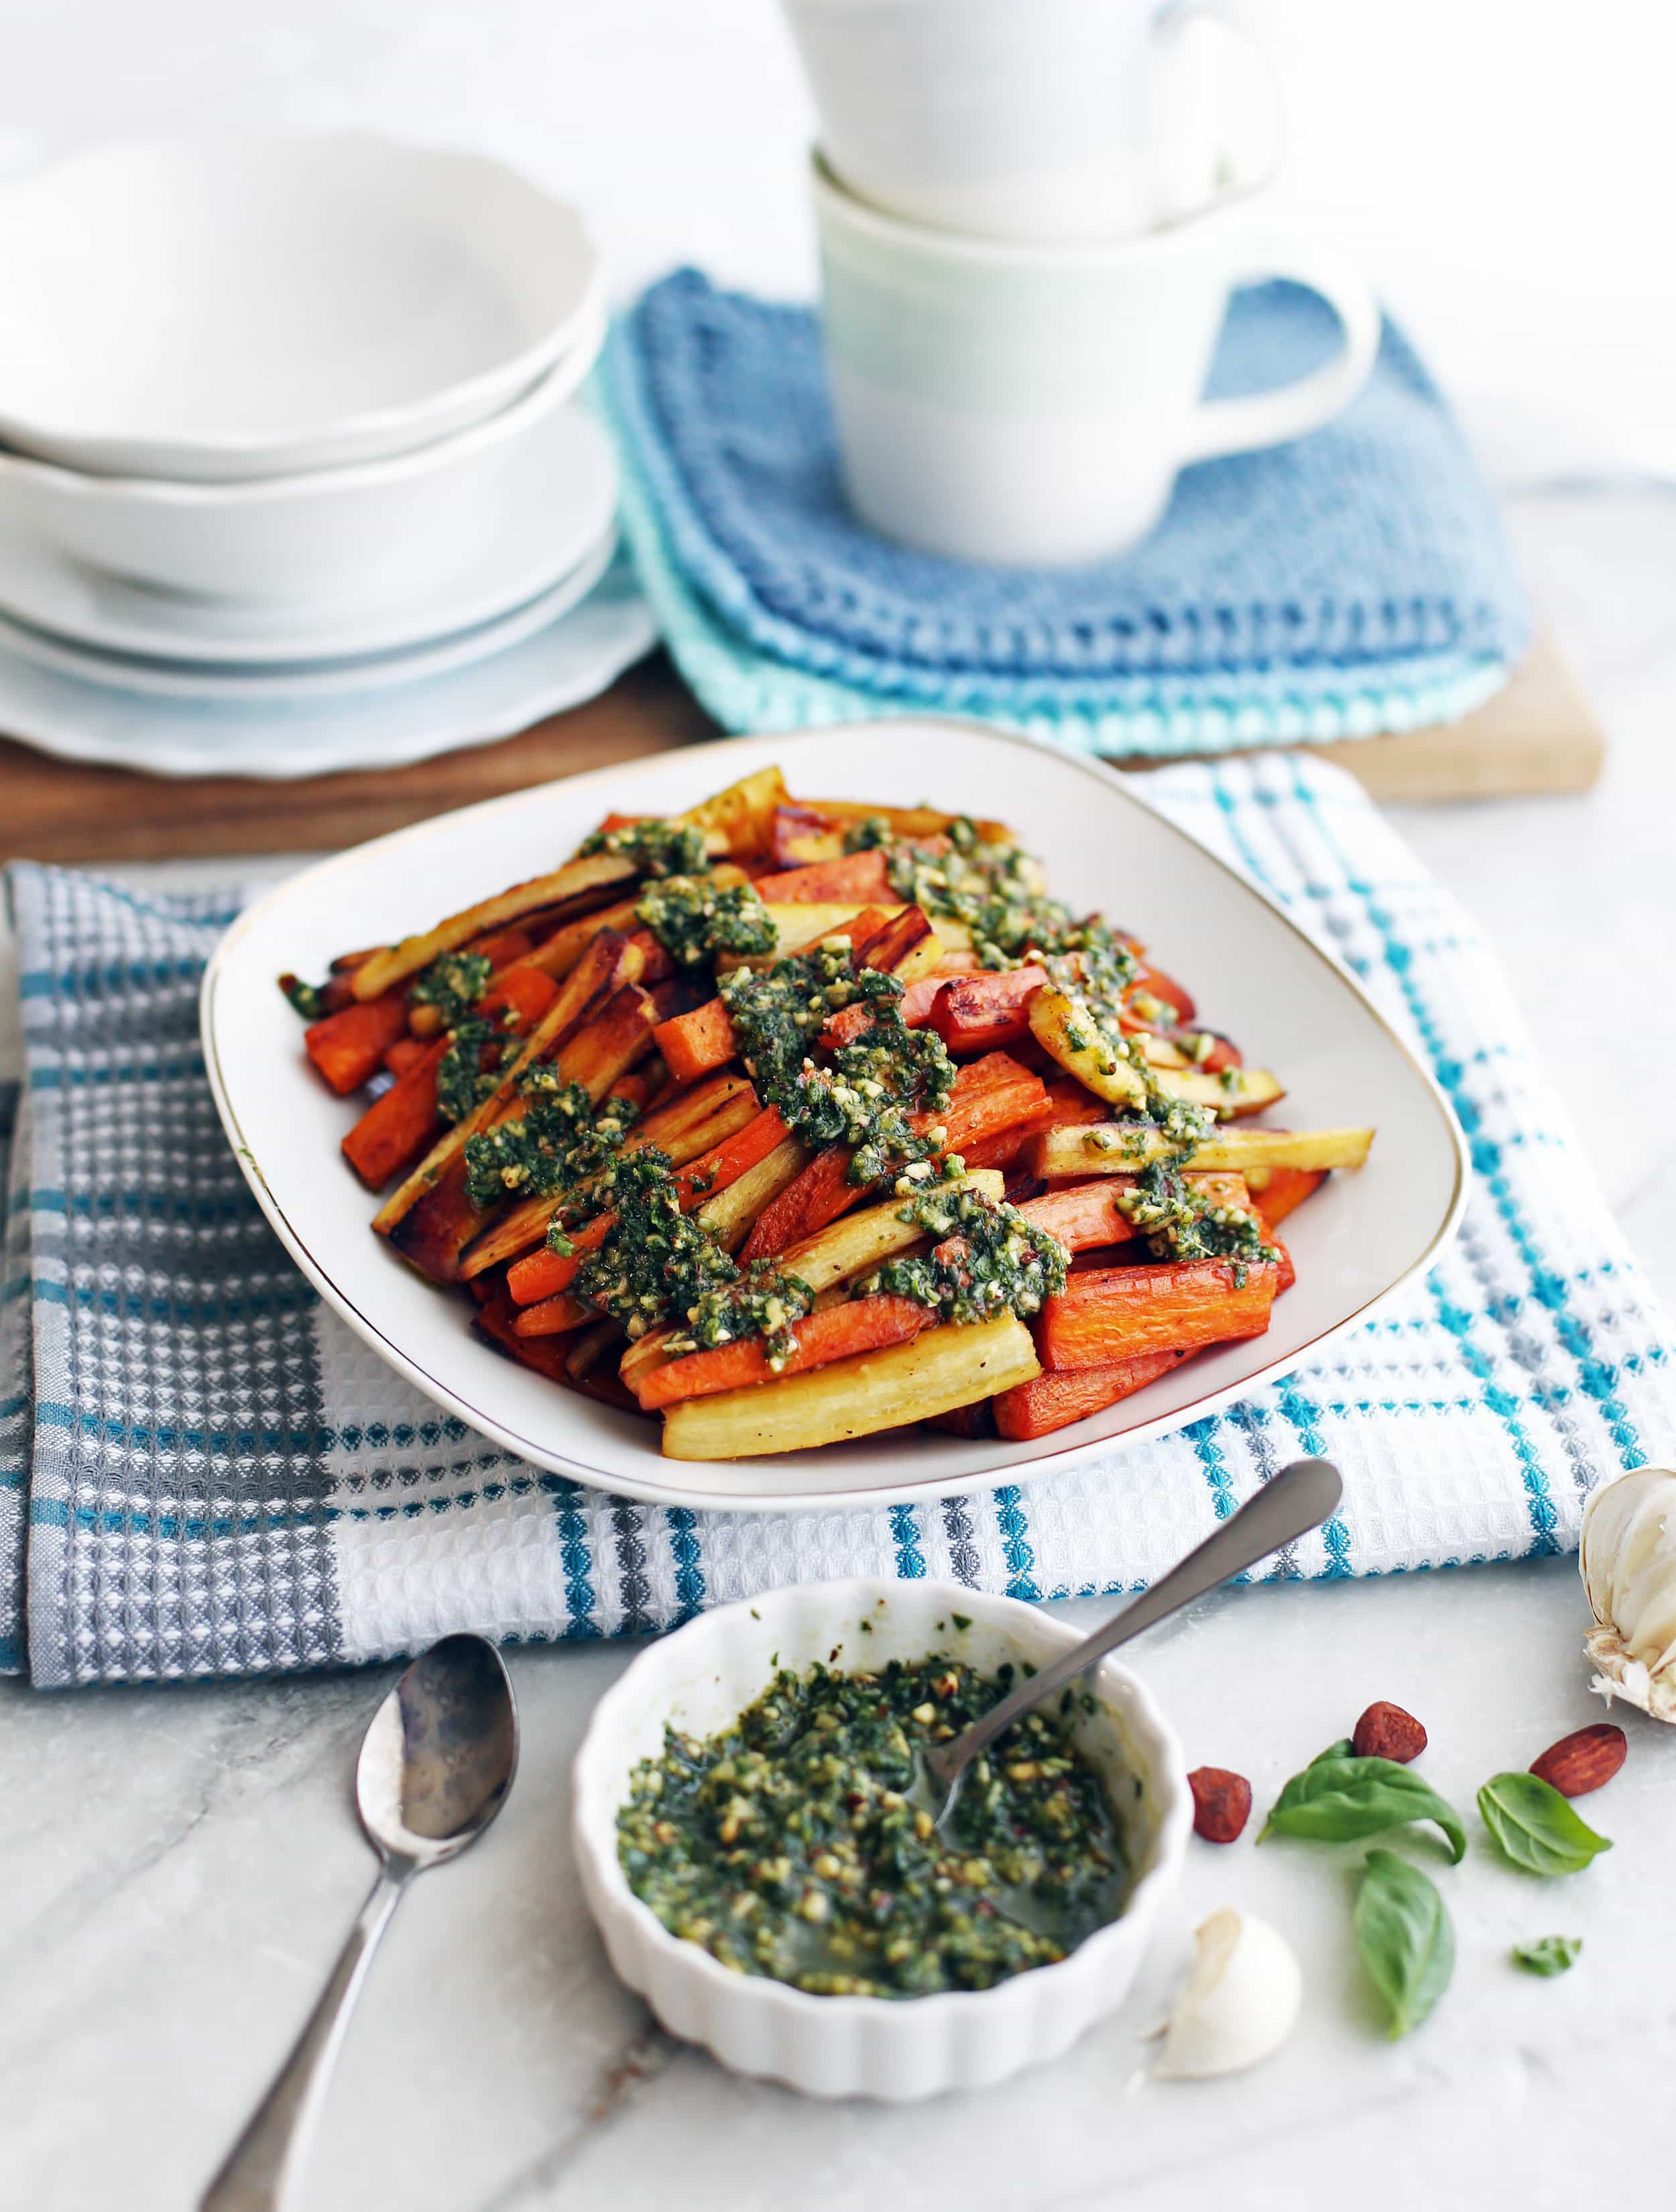 Roasted Balsamic Root Vegetables topped with Basil Almond Pesto on a white plate; more pesto in a small bowl on the side.